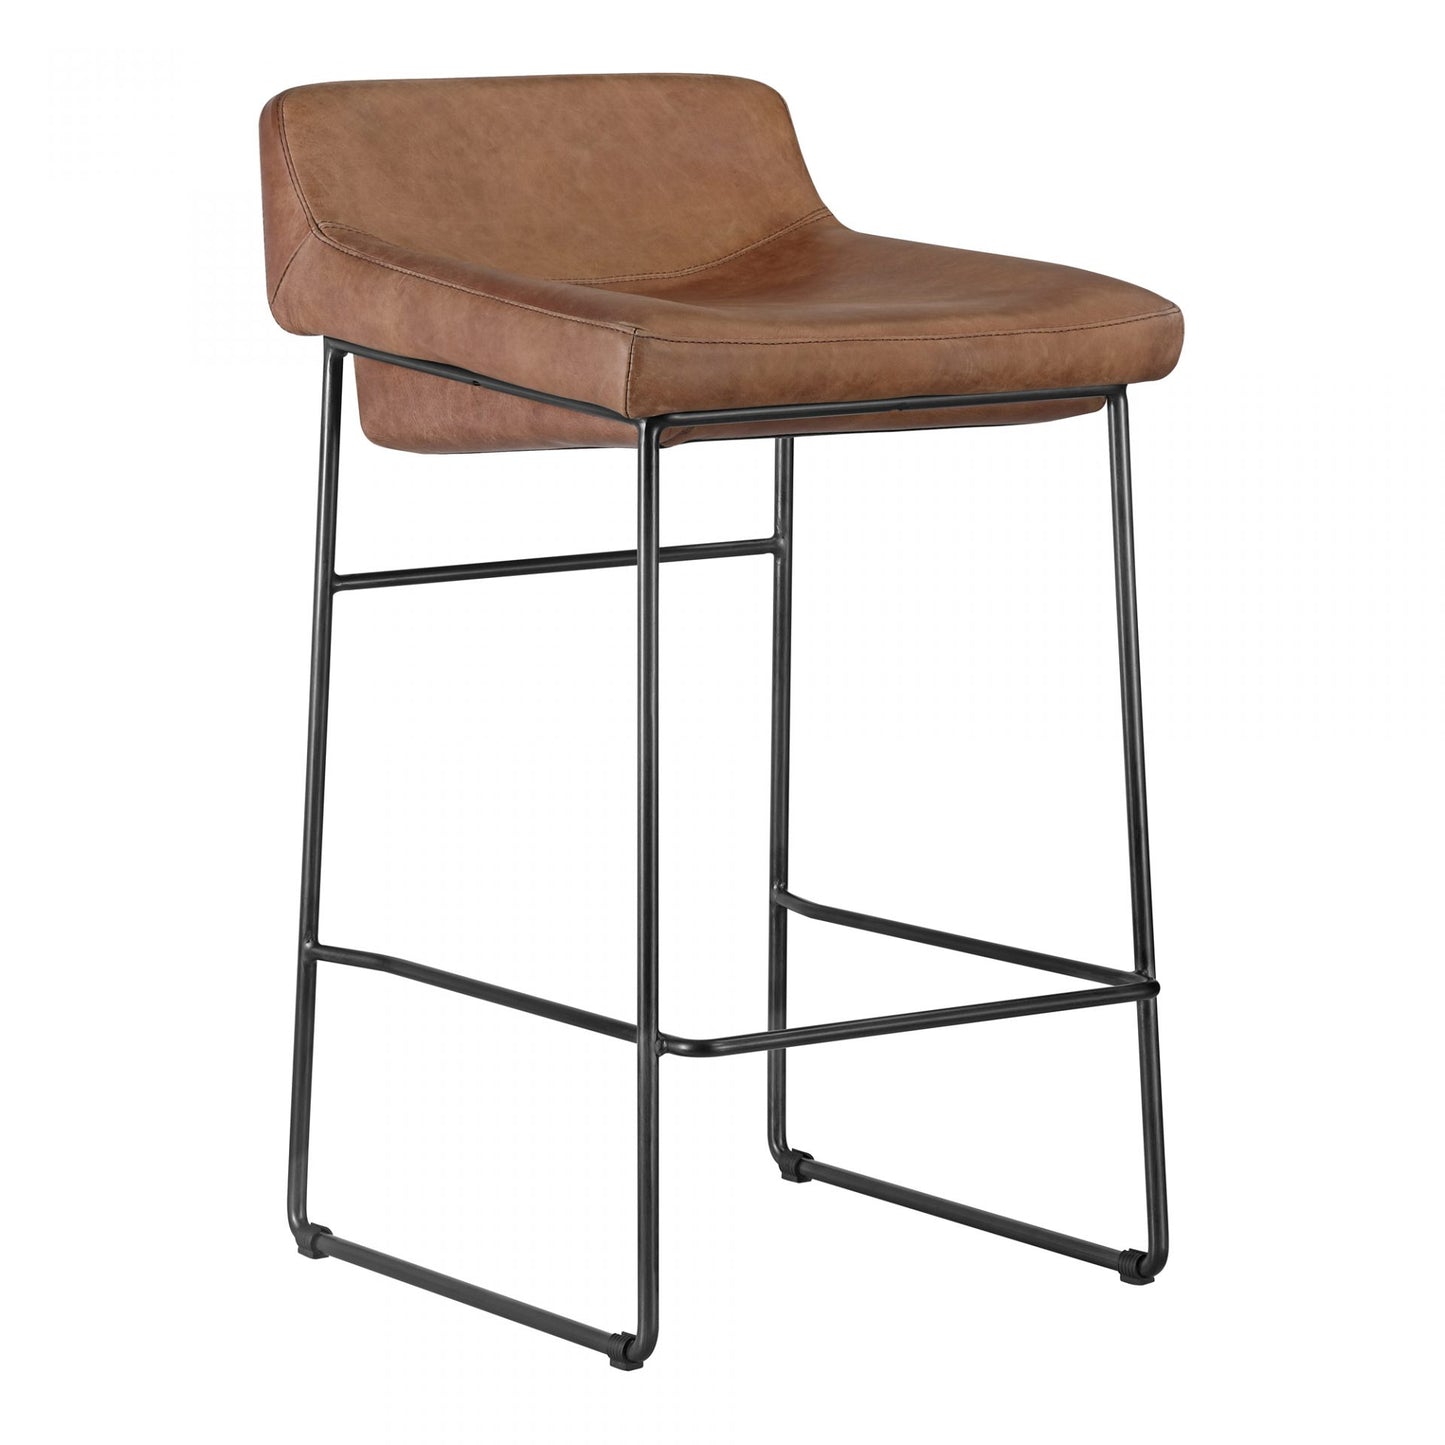 Starlet Counter Stool Open Road Brown Leather Set of 2